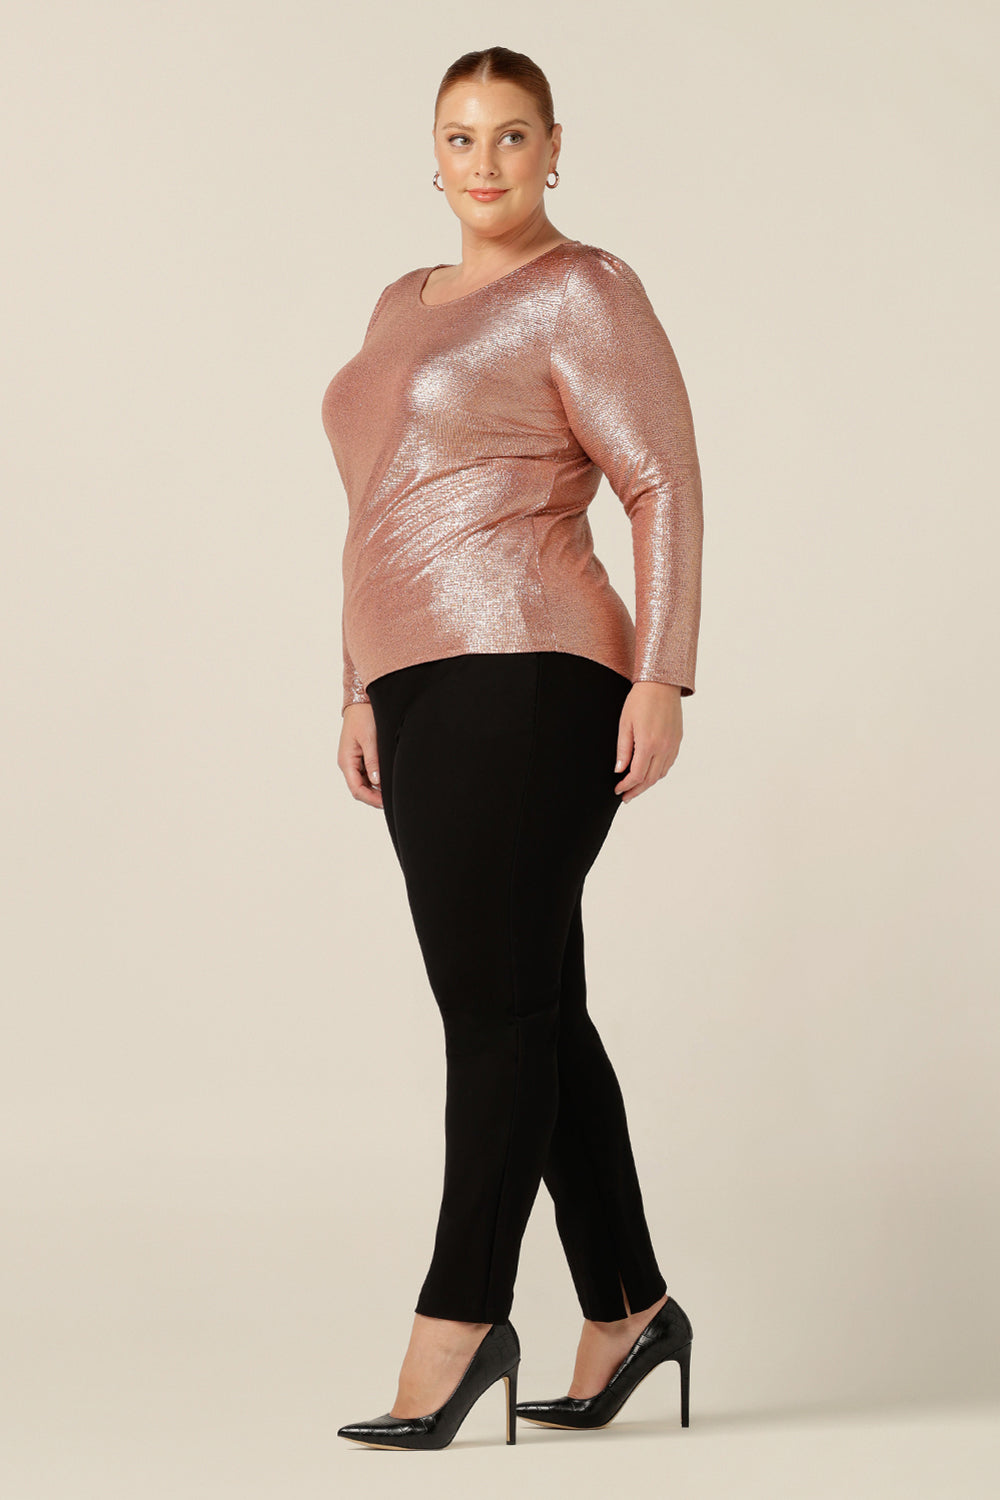 A pretty sparkly top for evening and occasionwear, the Jody Top in shimmering pink jersey has a high scoop neck and long sleeves. This women's top is shown in a size 18 and worn with slim leg black evening pants. Made in Australia by Australian and New Zealand women's clothing brand, L&F, this evening top is available for petite to plus size women in sizes 8 to 24.